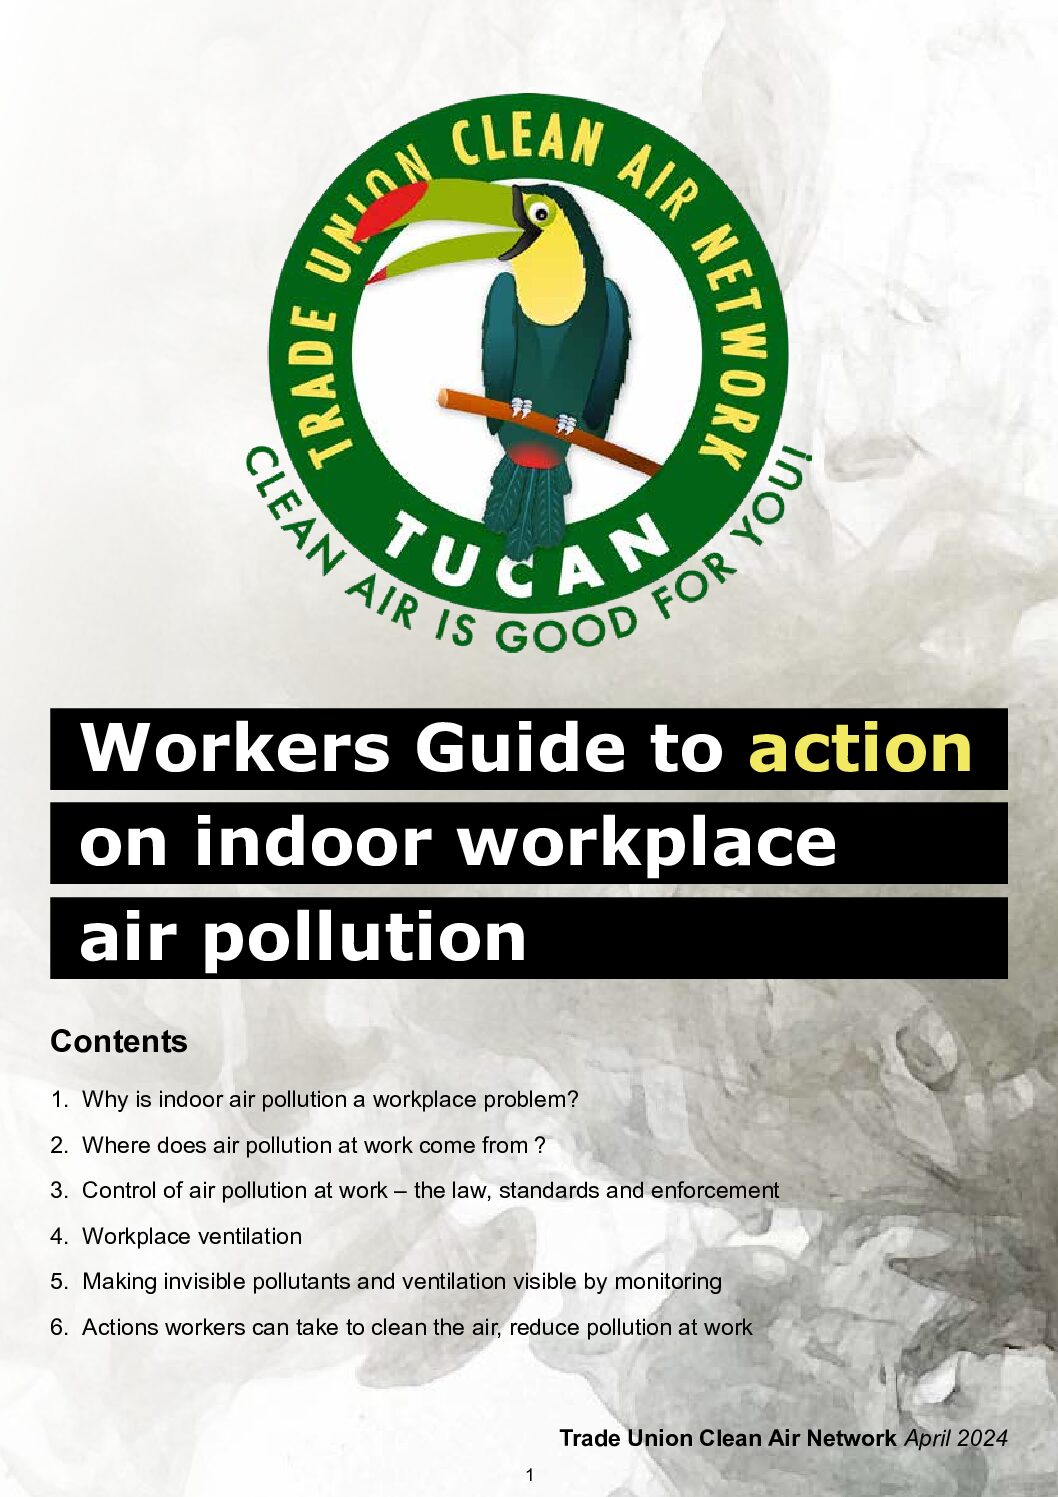 Workers Guide to action on indoor workplace air pollution